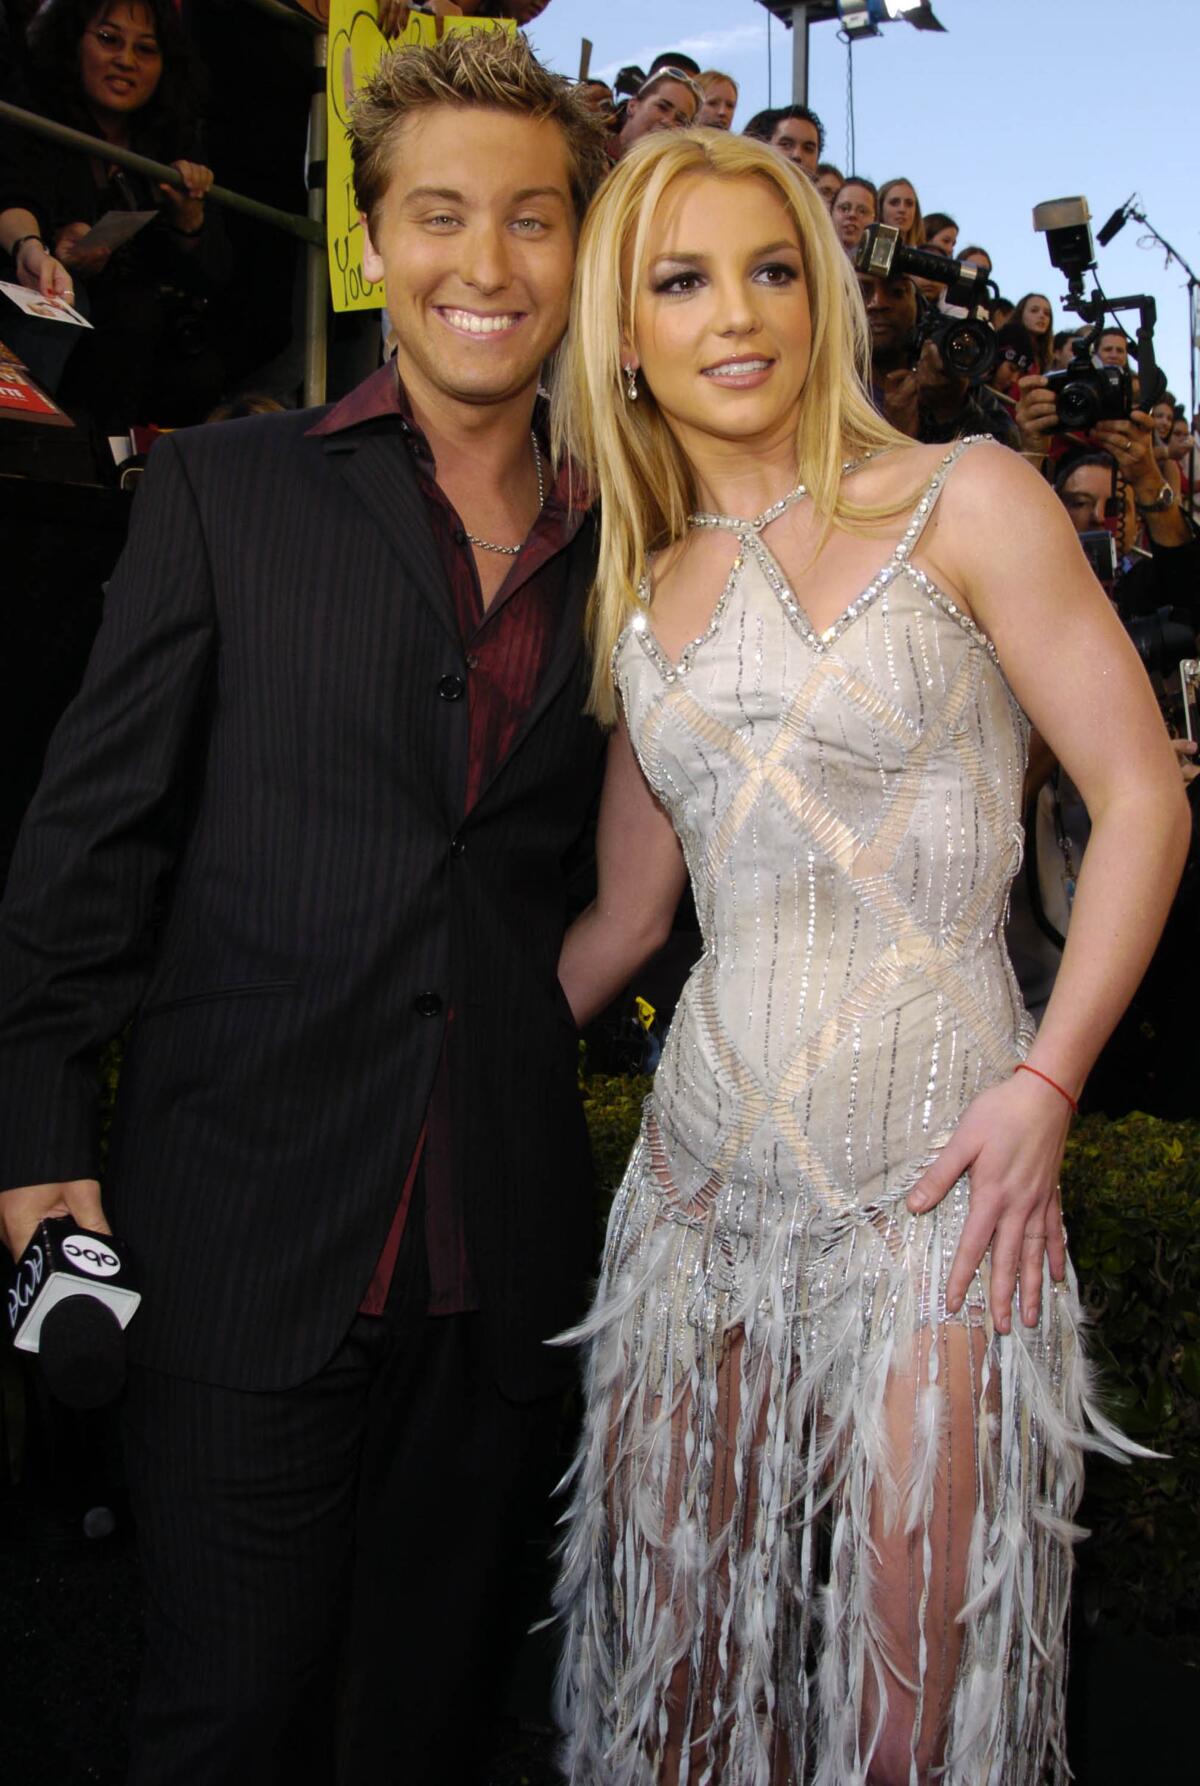 Lance Bass is dressed in a black suit and is posing together with Britney Spears who is wearing a silver dress